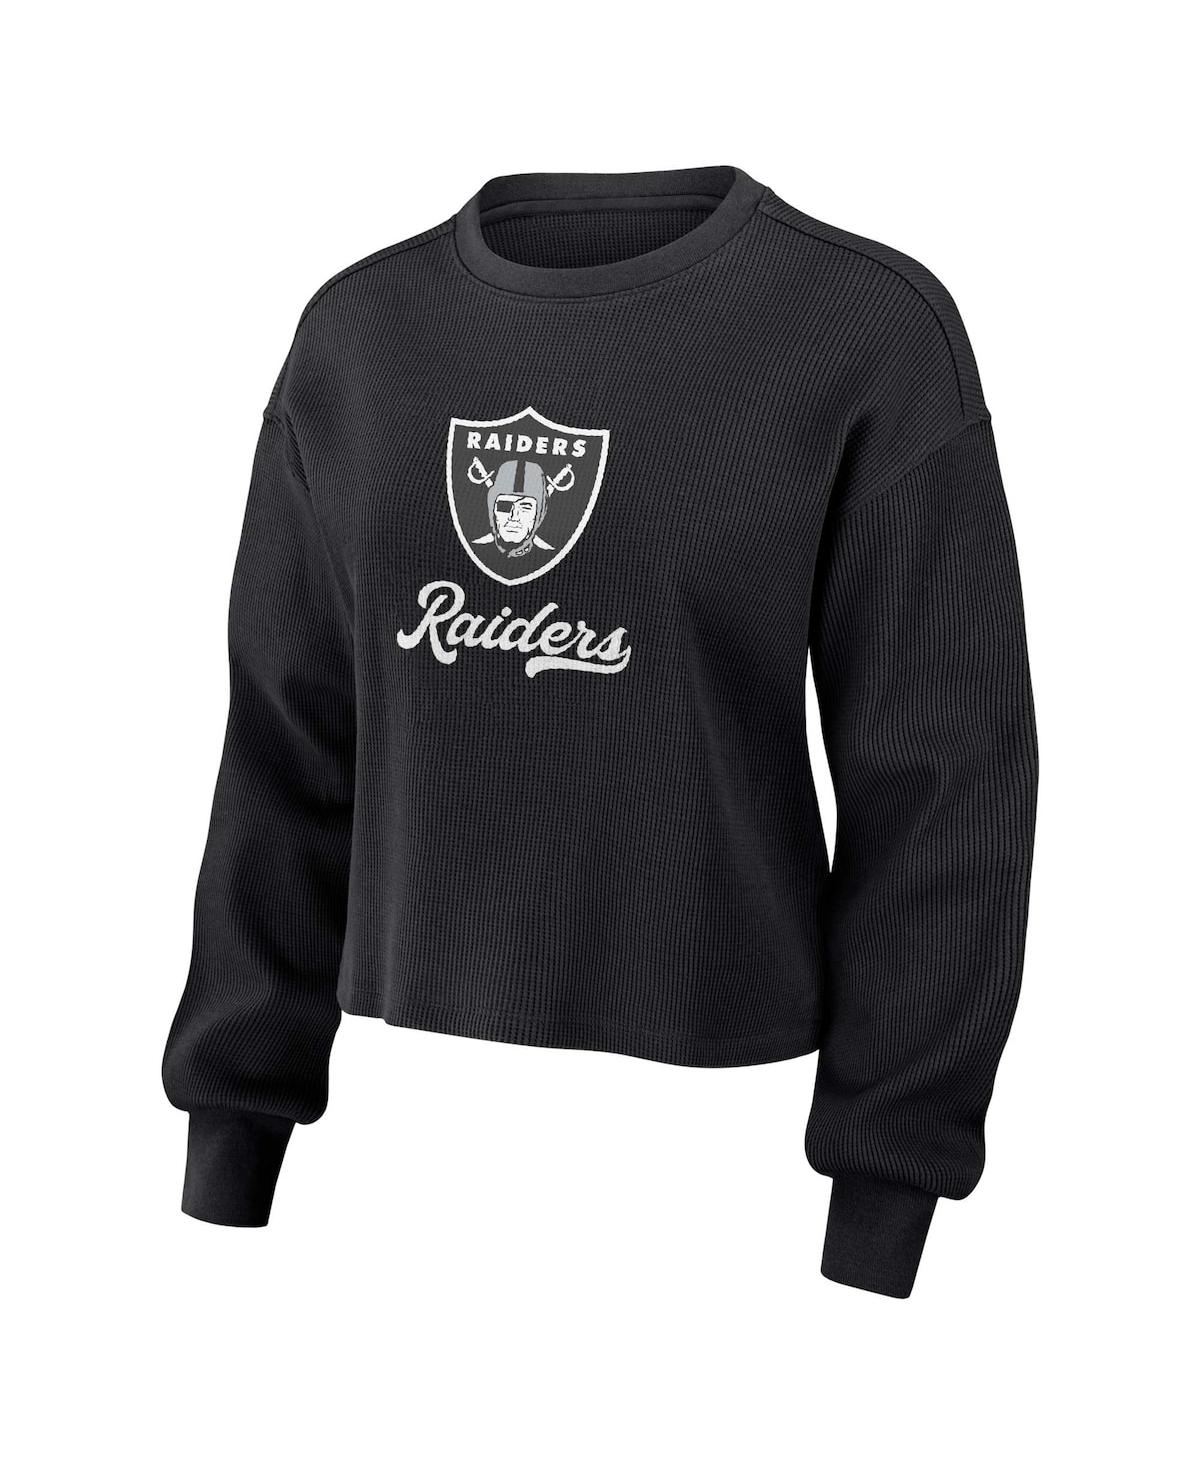 Shop Wear By Erin Andrews Women's  Black Distressed Las Vegas Raiders Waffle Knit Long Sleeve T-shirt And